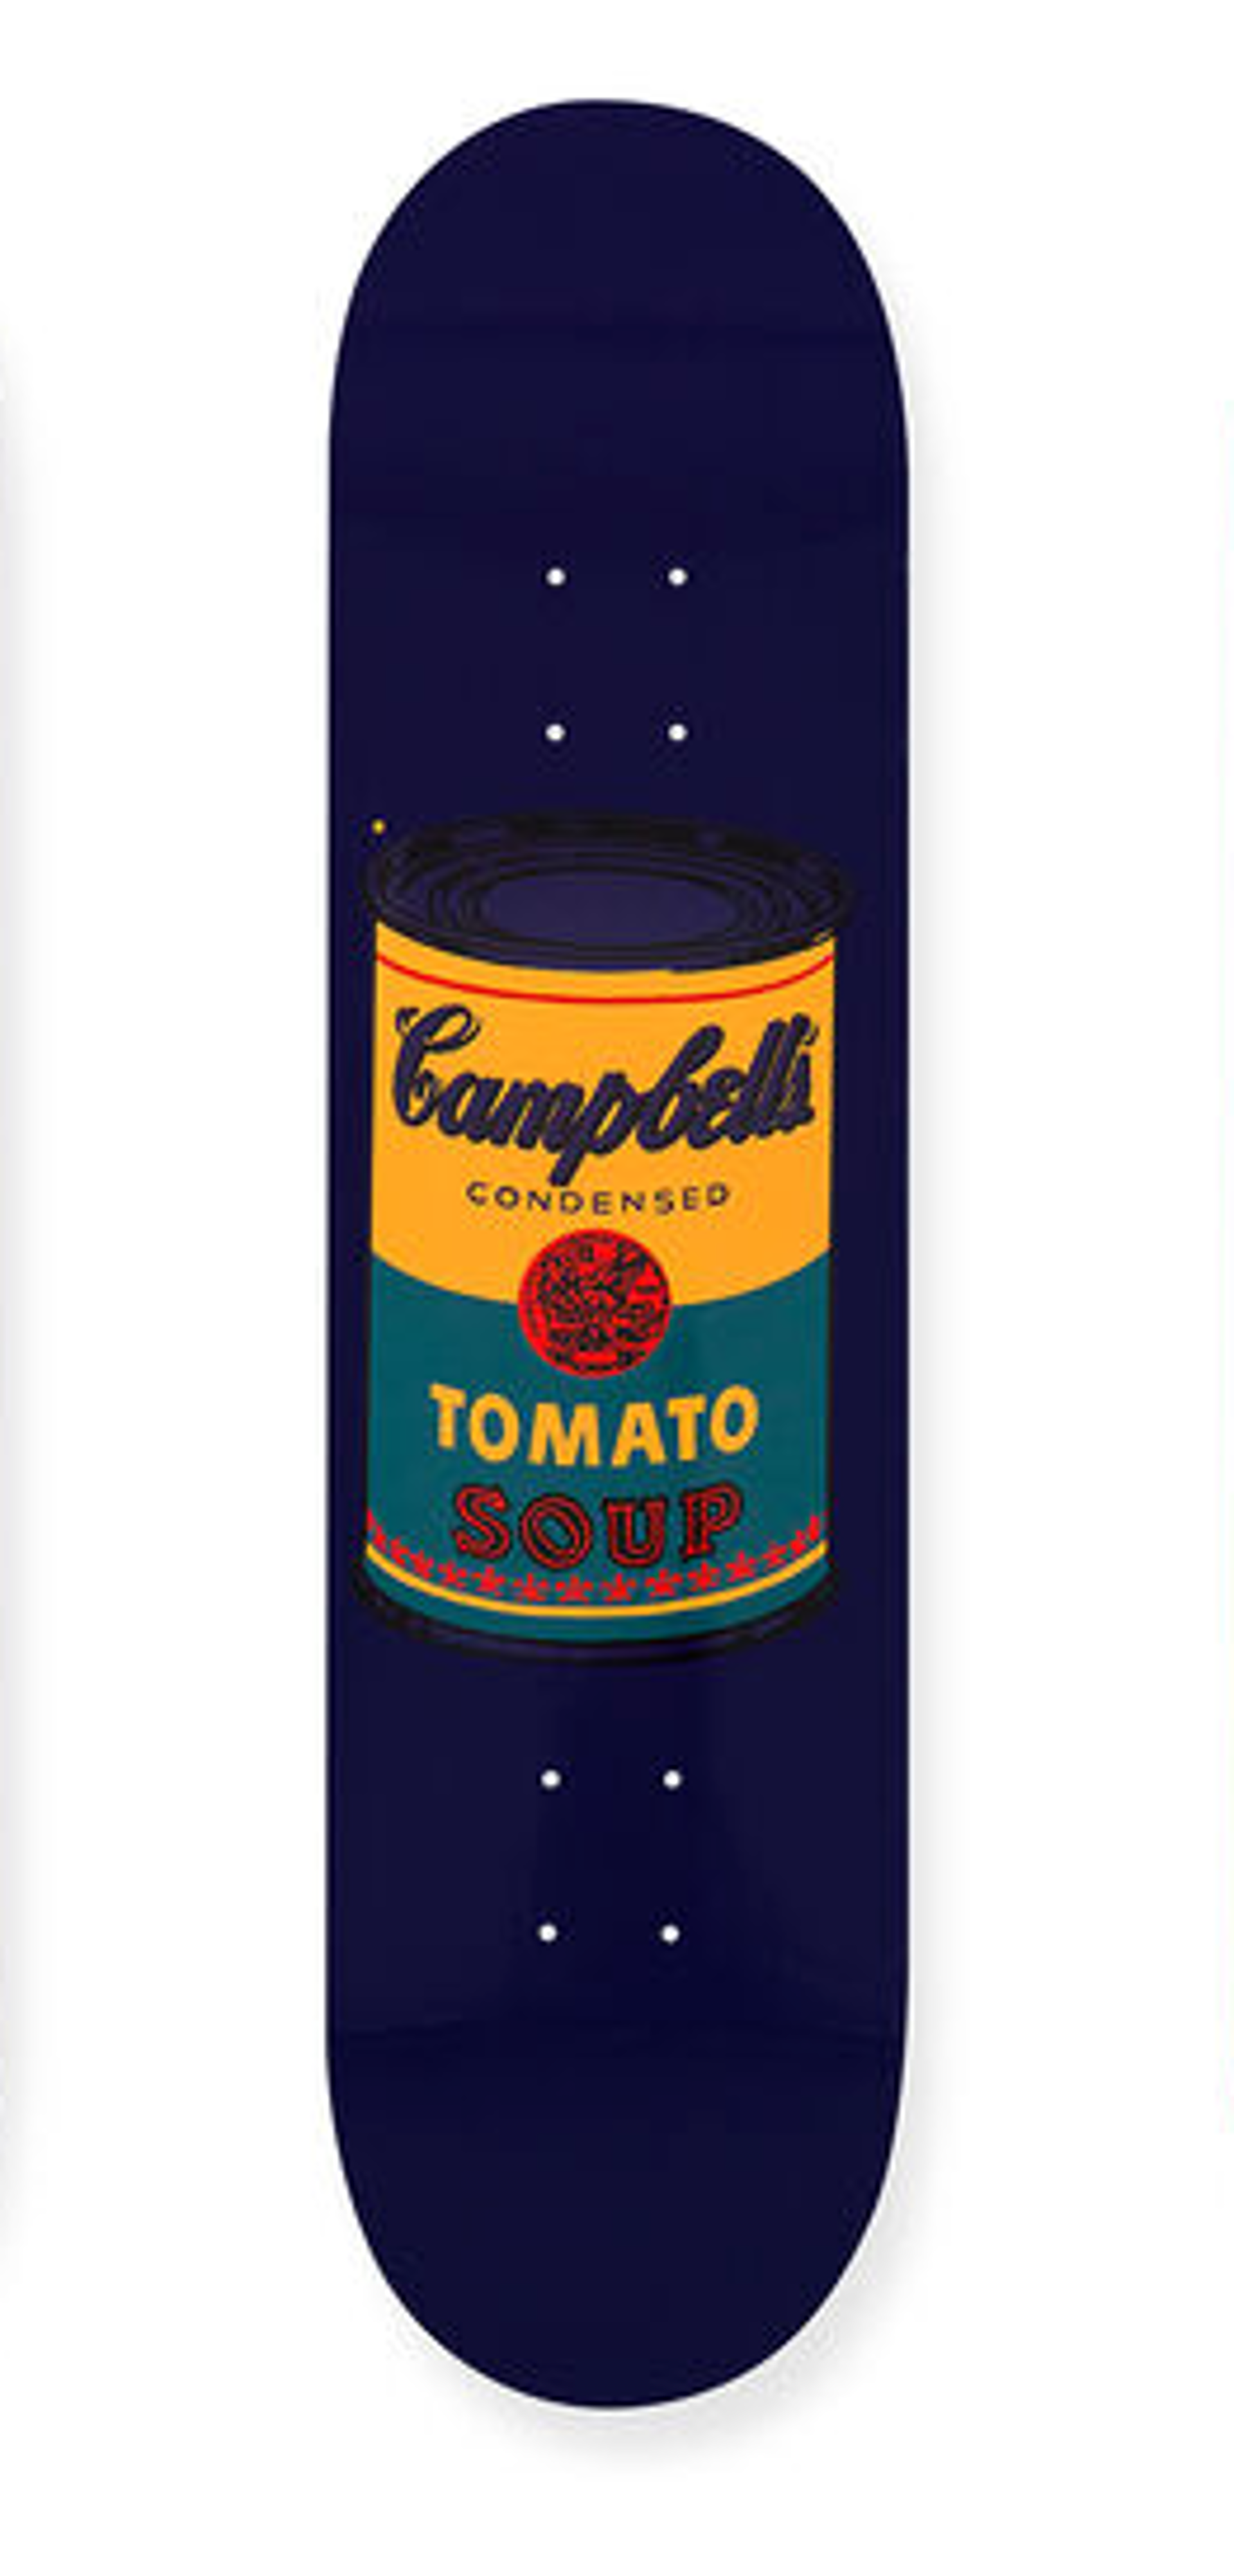 Campbell's Soup Skate Deck (Navy with Navy can) by Andy Warhol